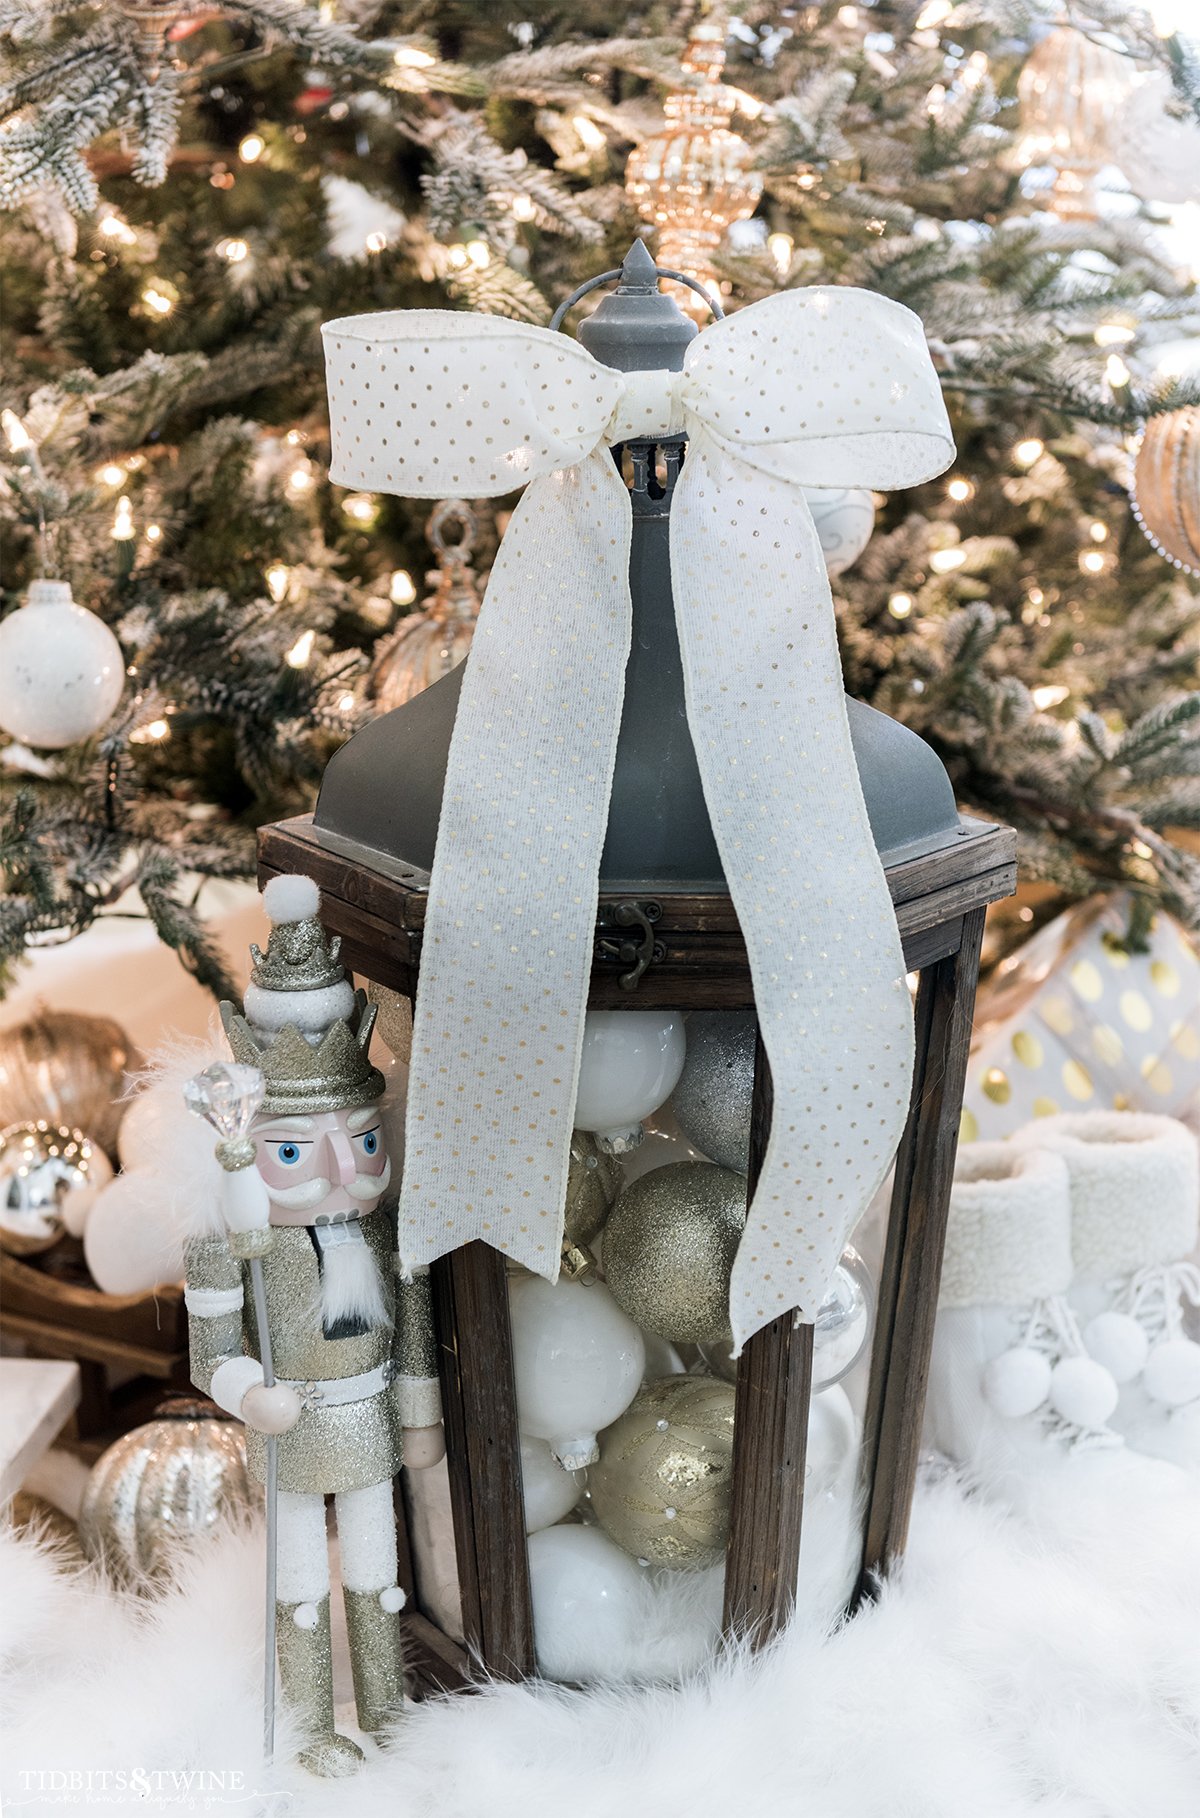 lantern filled with ornaments and a large bow on top in front of a Christmas tree